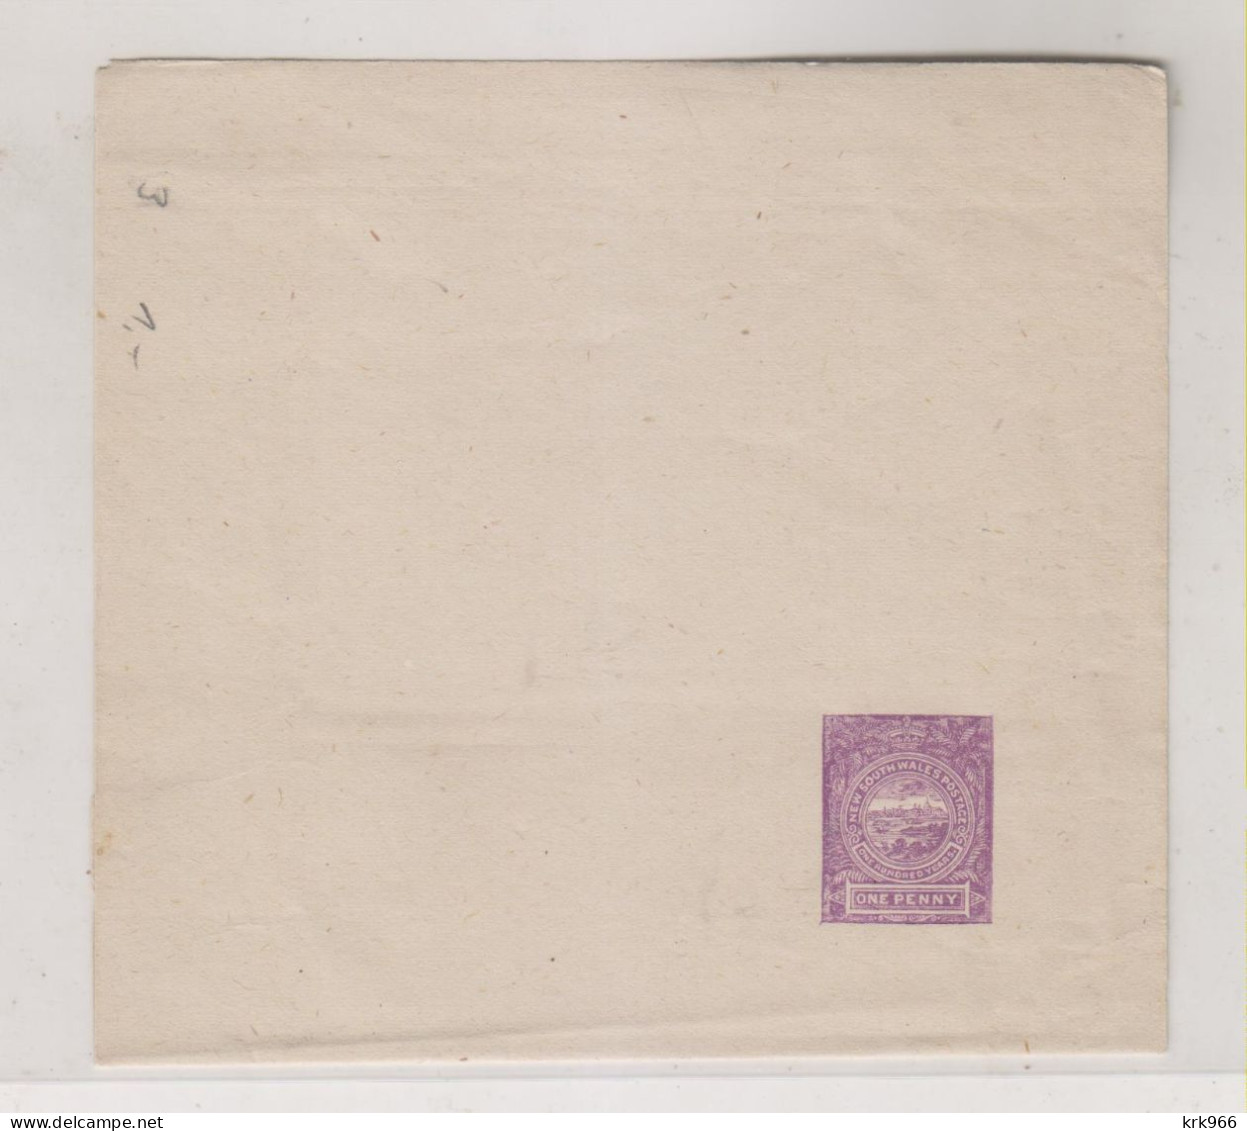 NEW SOUTH WALES Postal Stationery Newspaper Wrapper Unused - Covers & Documents